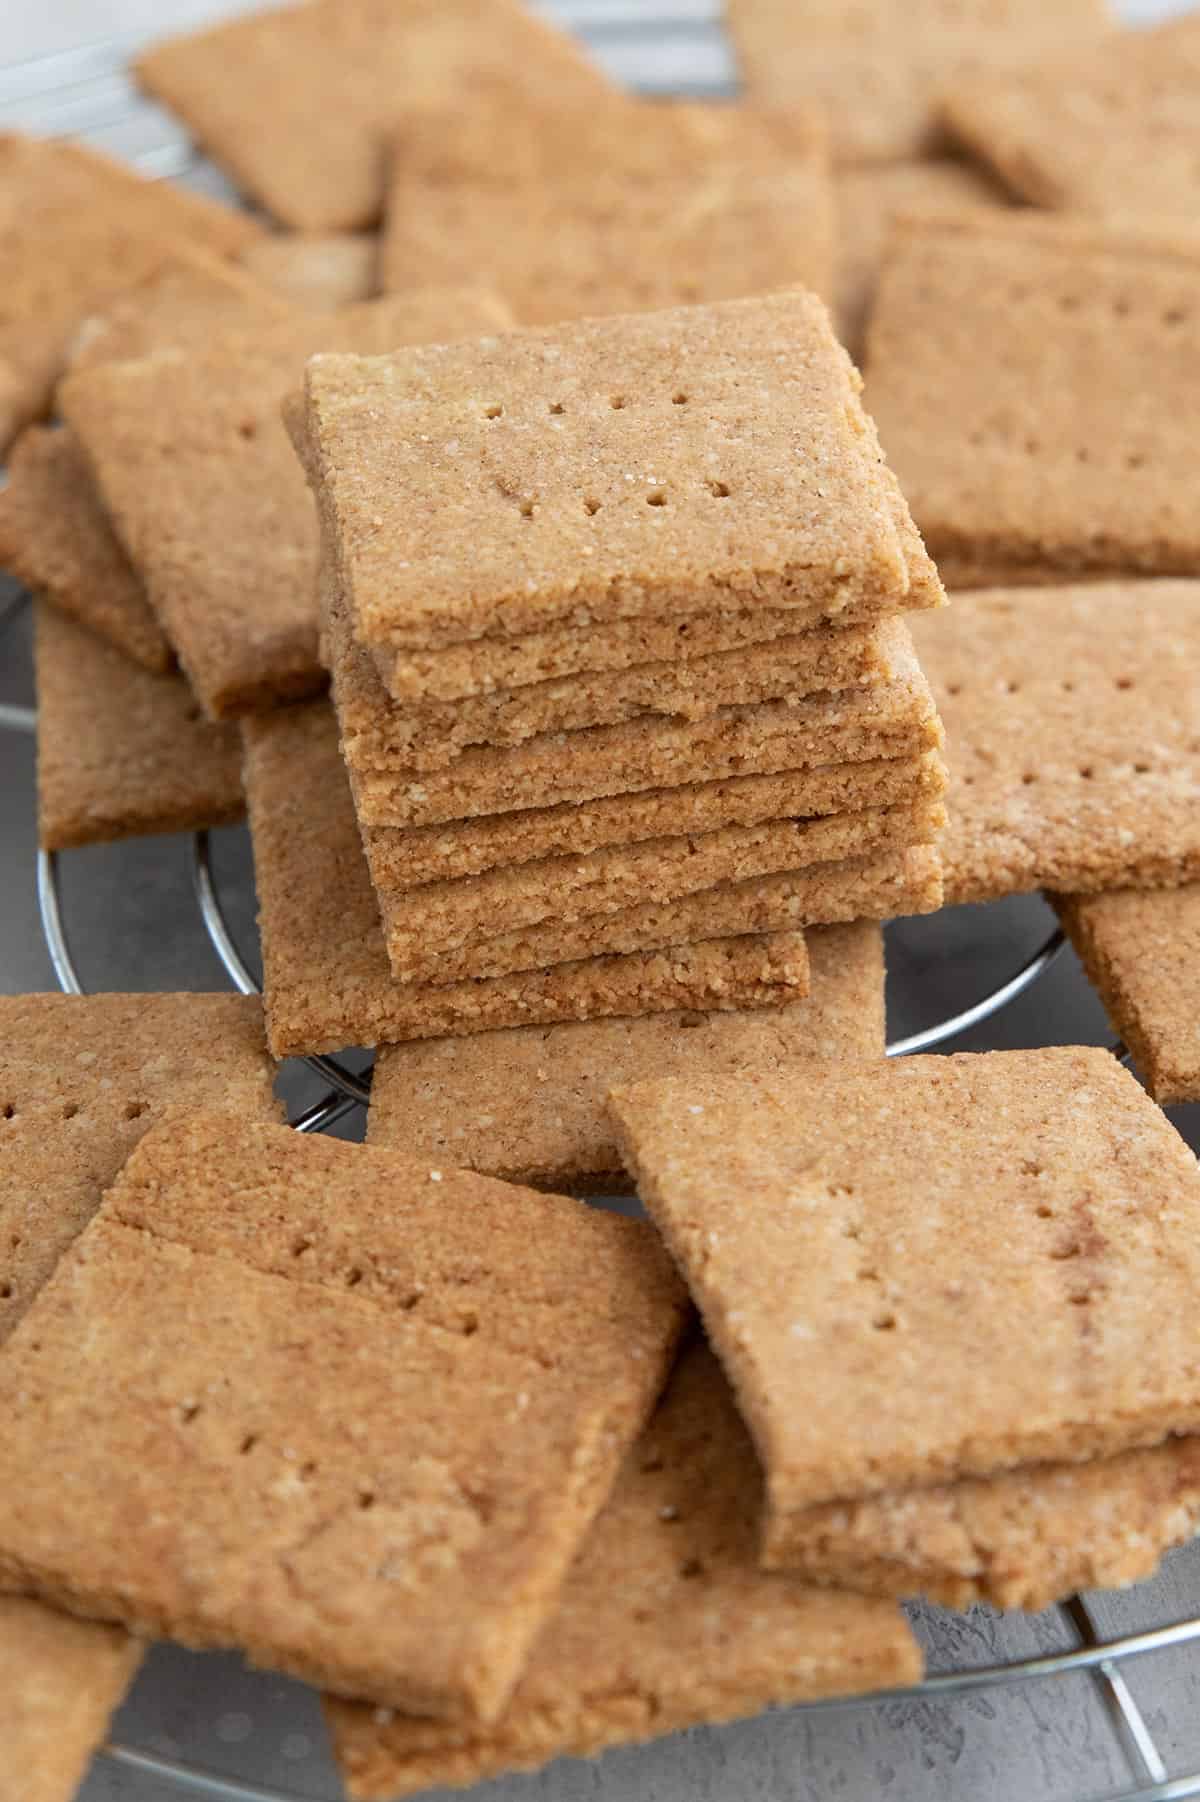 Keto graham crackers piled up on a cooling rack.